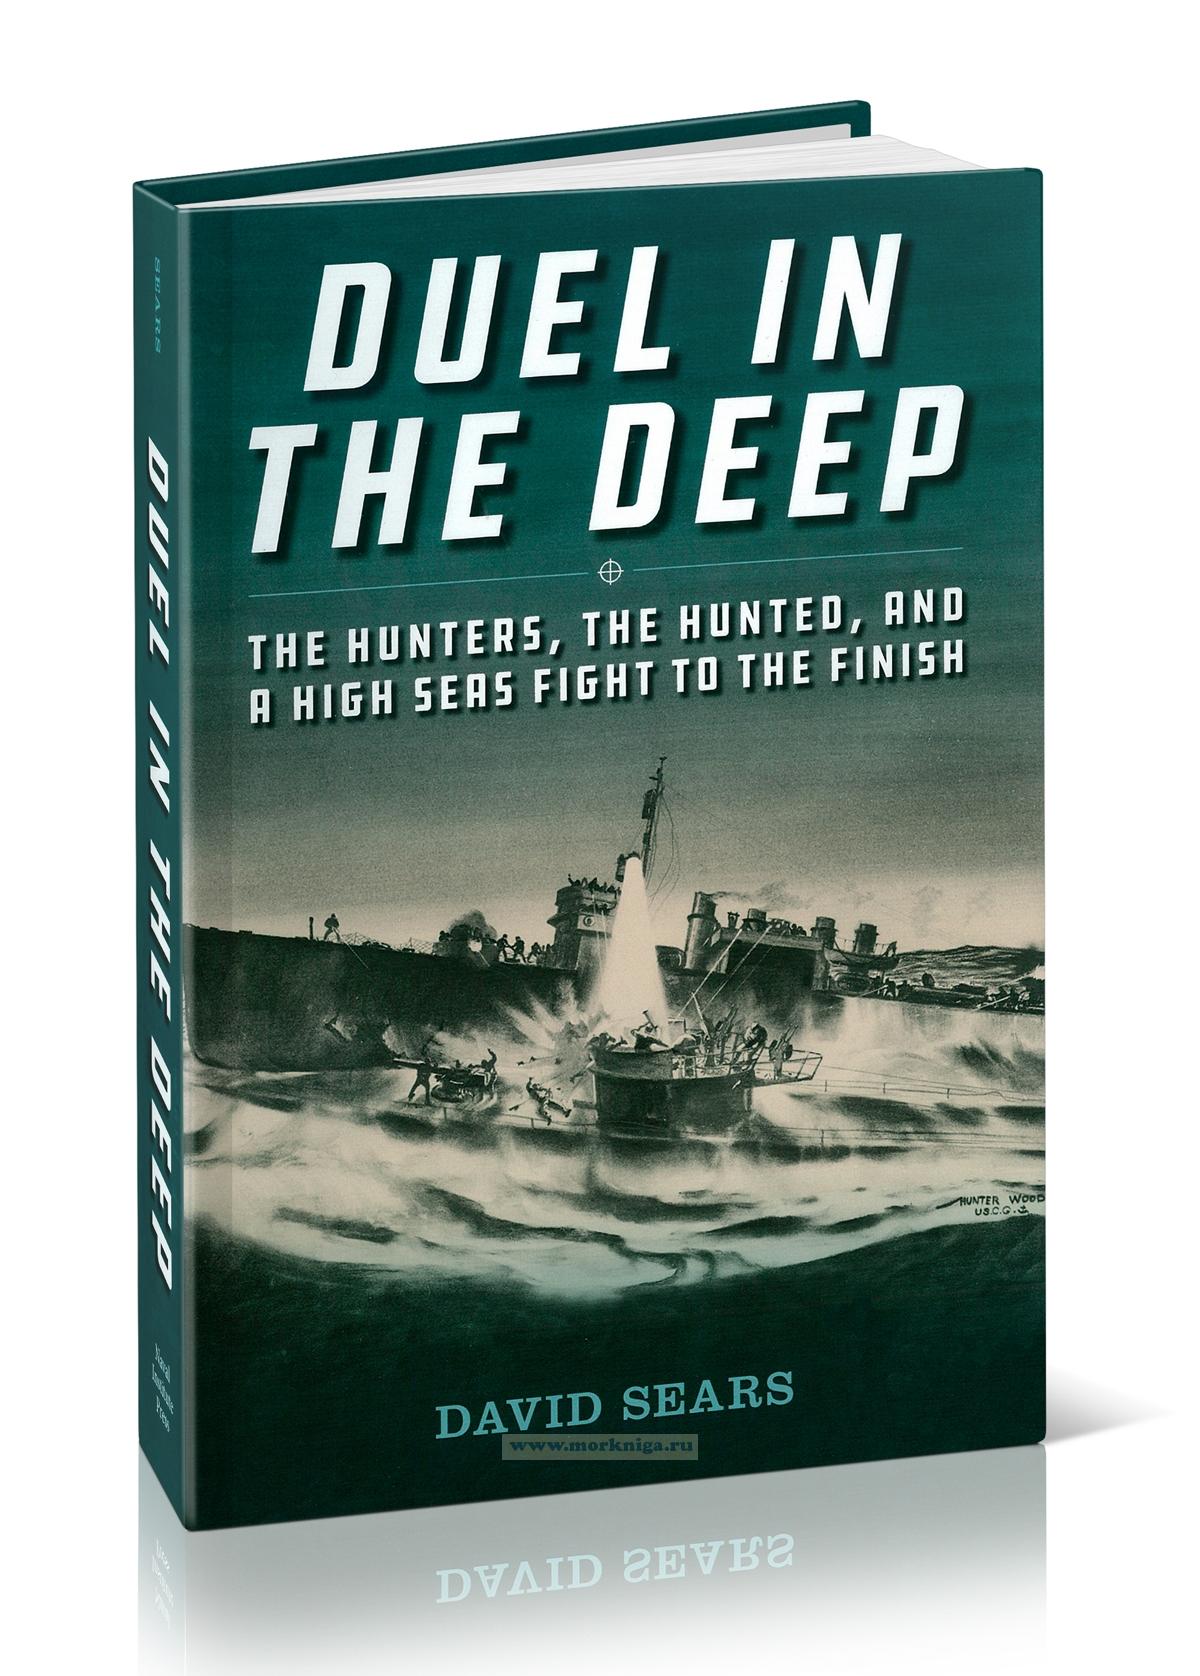 Duel in the Deep. The Hunters, the Hunted, and a High Seas Fight to the Finish